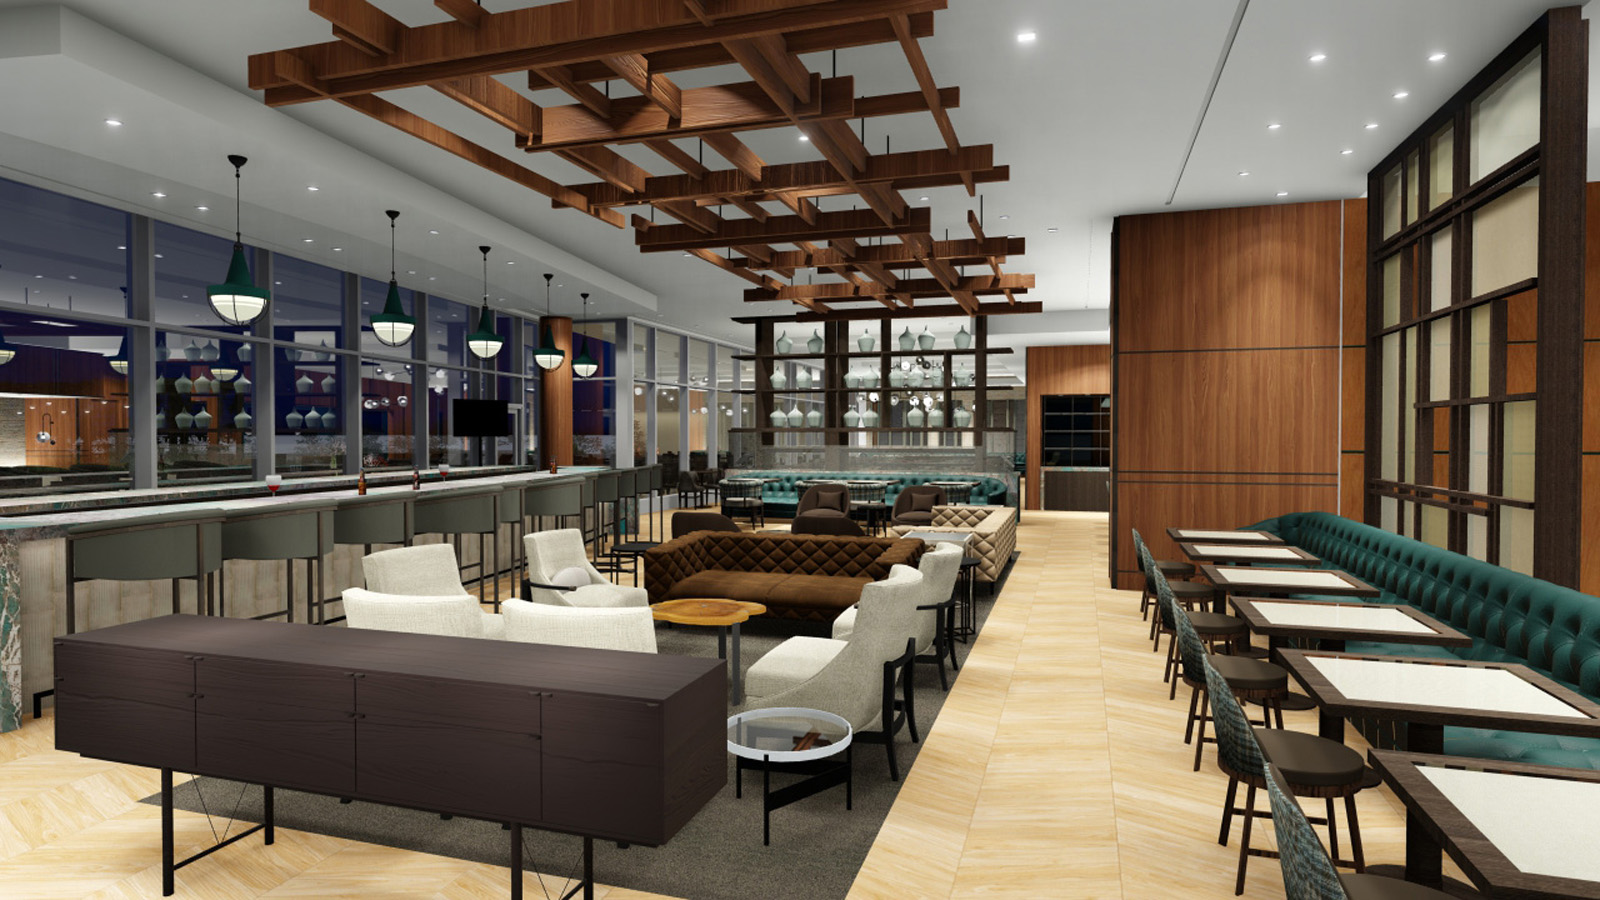 Sauce Magazine - Gerard Craft will open Cinder House at Four Seasons St. Louis